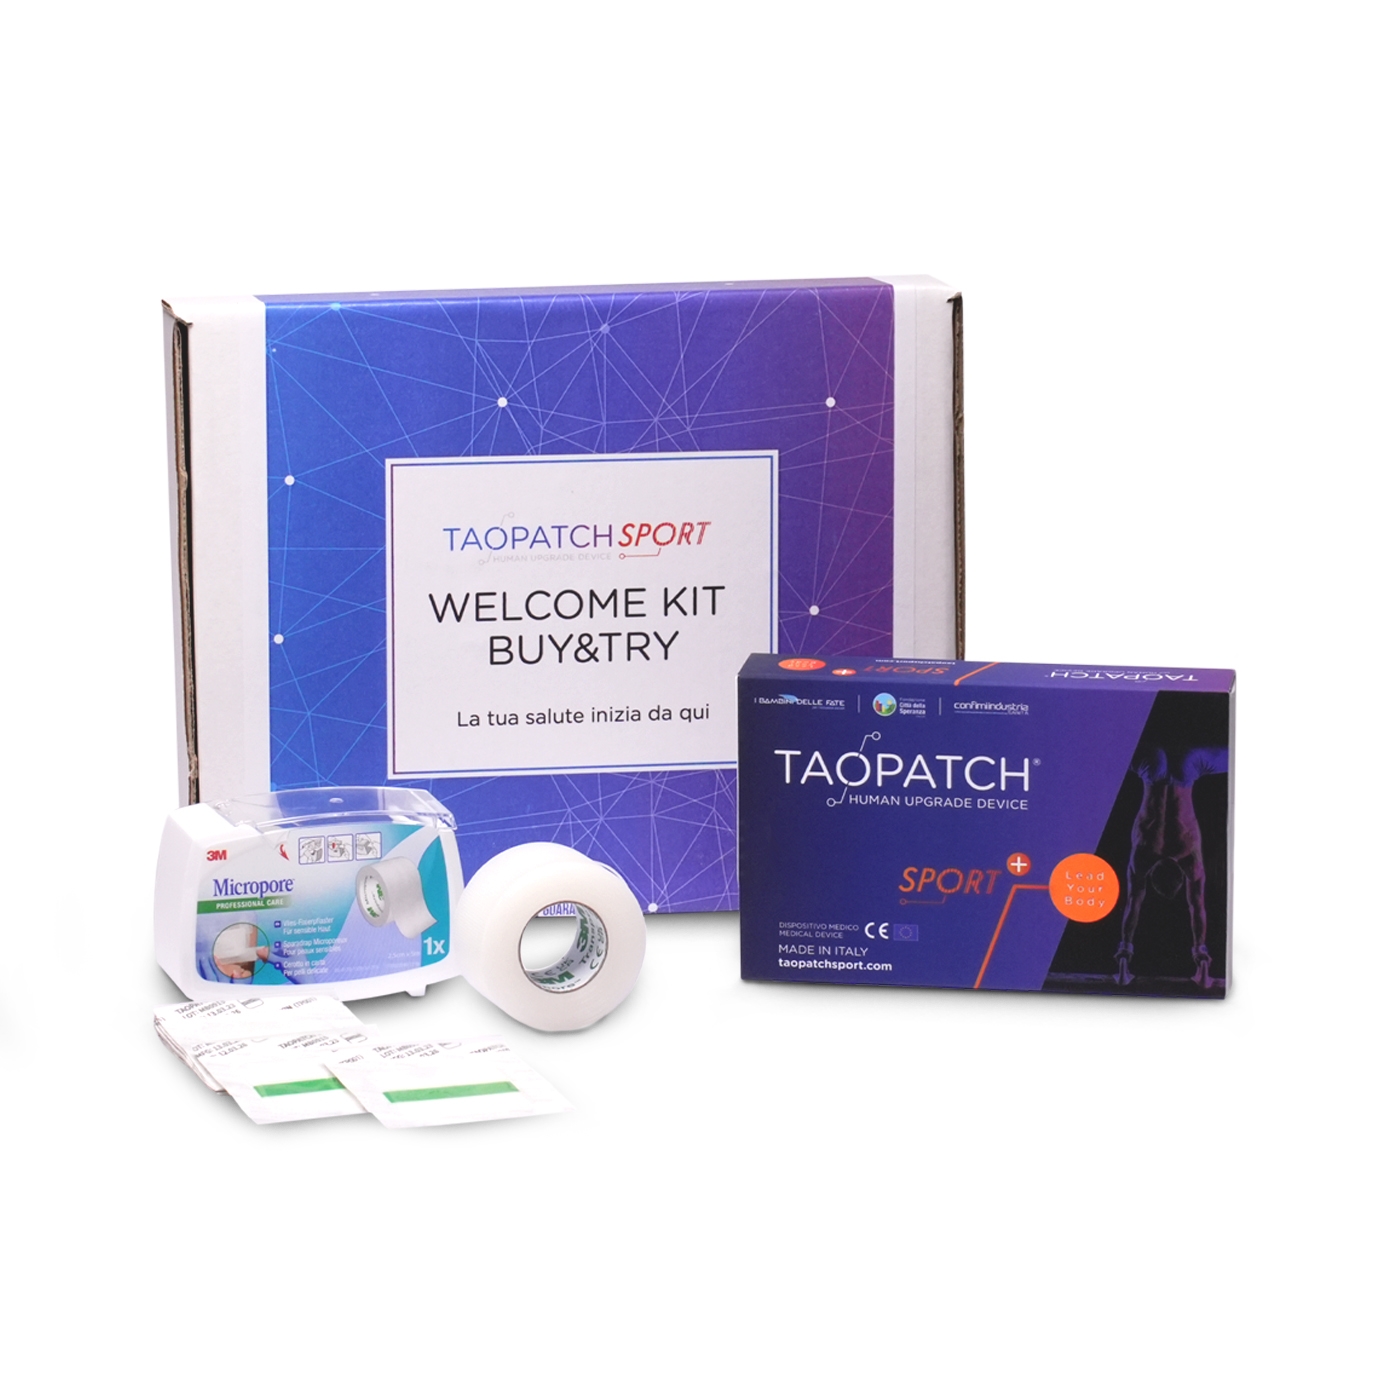 TAOPATCH® SPORT E APPLICAZIONE BUY AND TRY